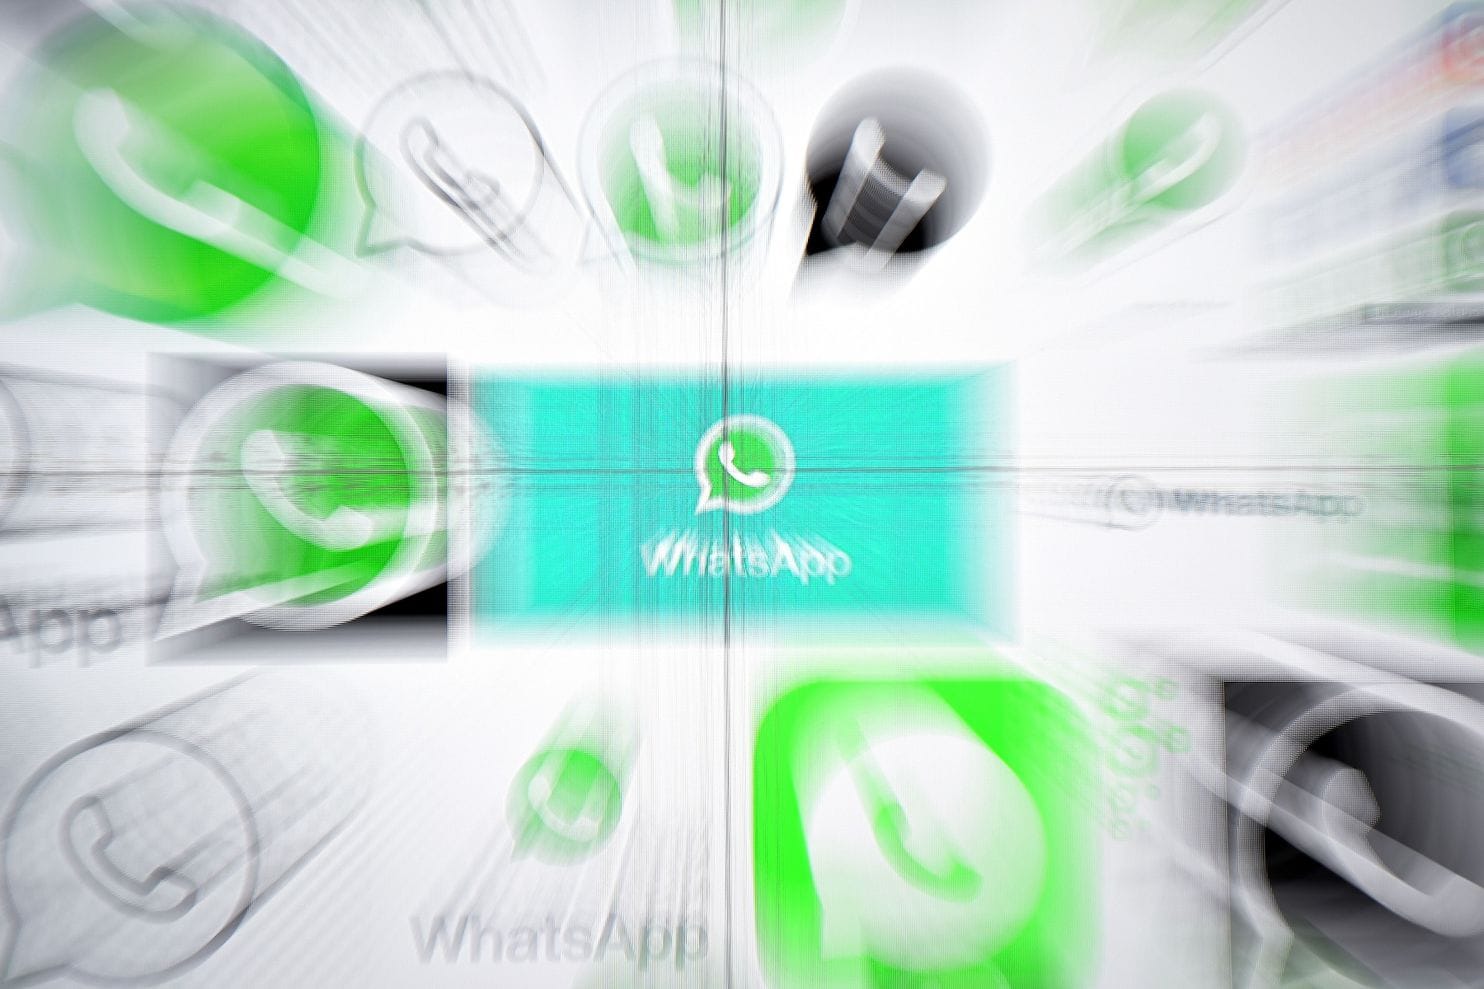 WhatsApp patches security flaw that allows attackers to deliver malware through calls